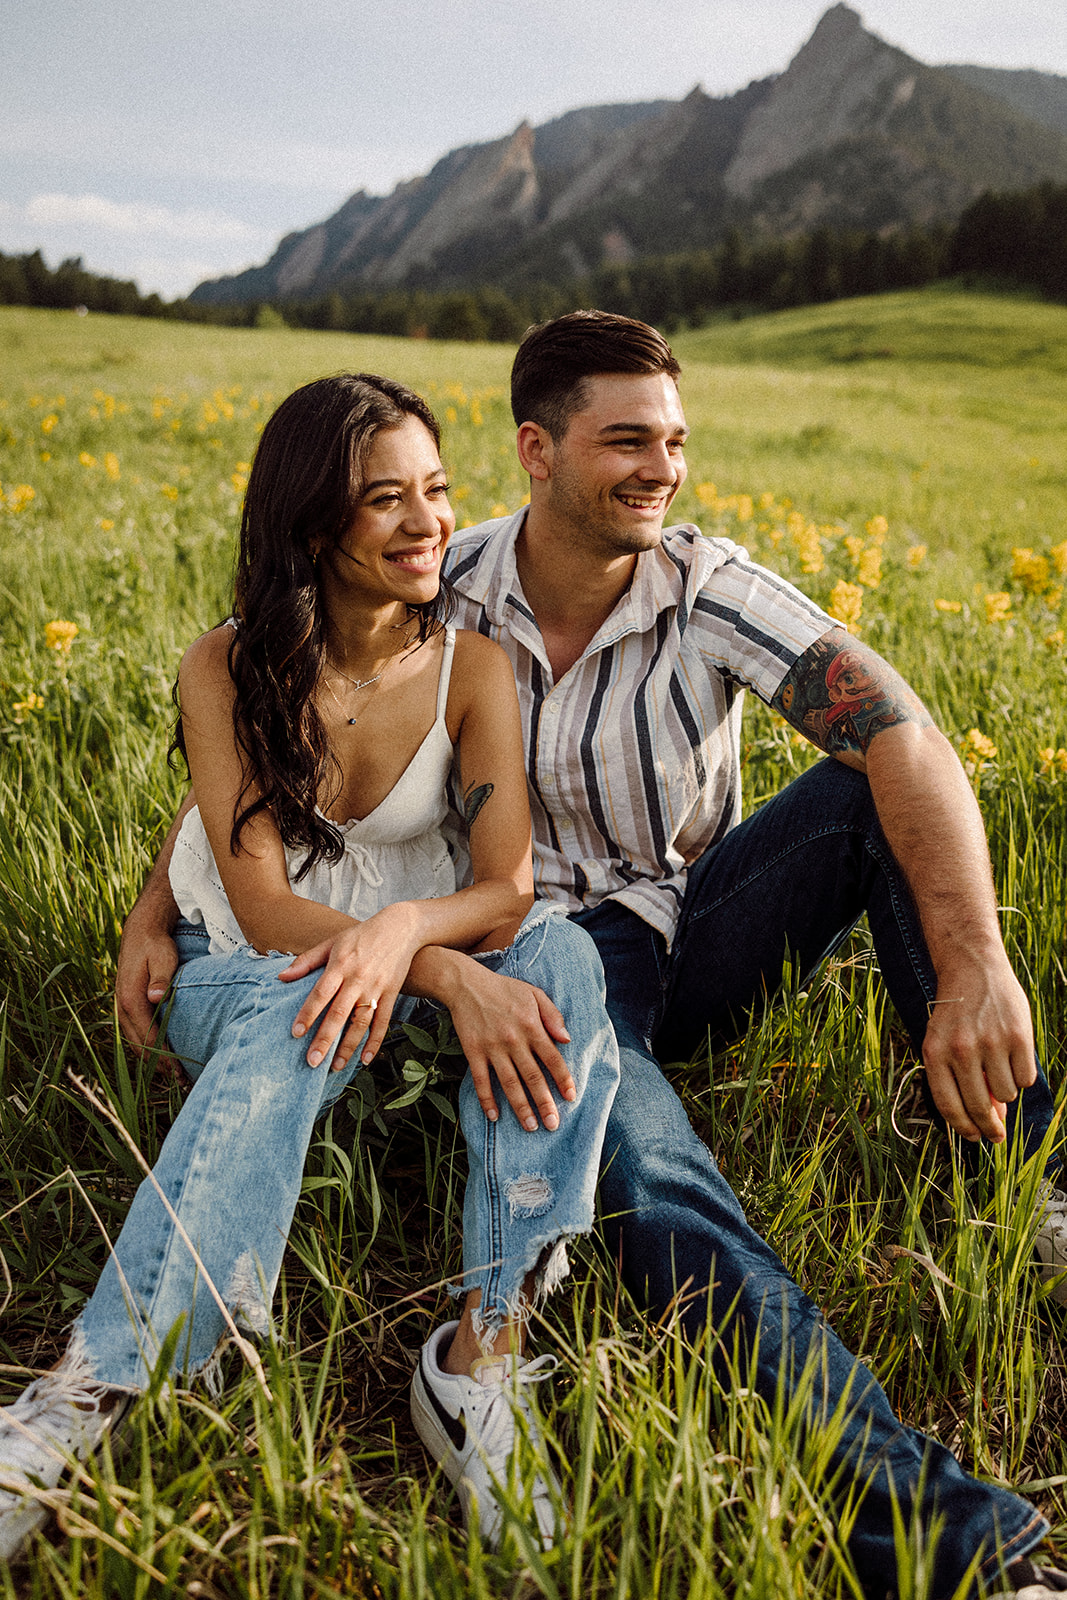 A man and a woman sitting in a meadow with mountains in the background 